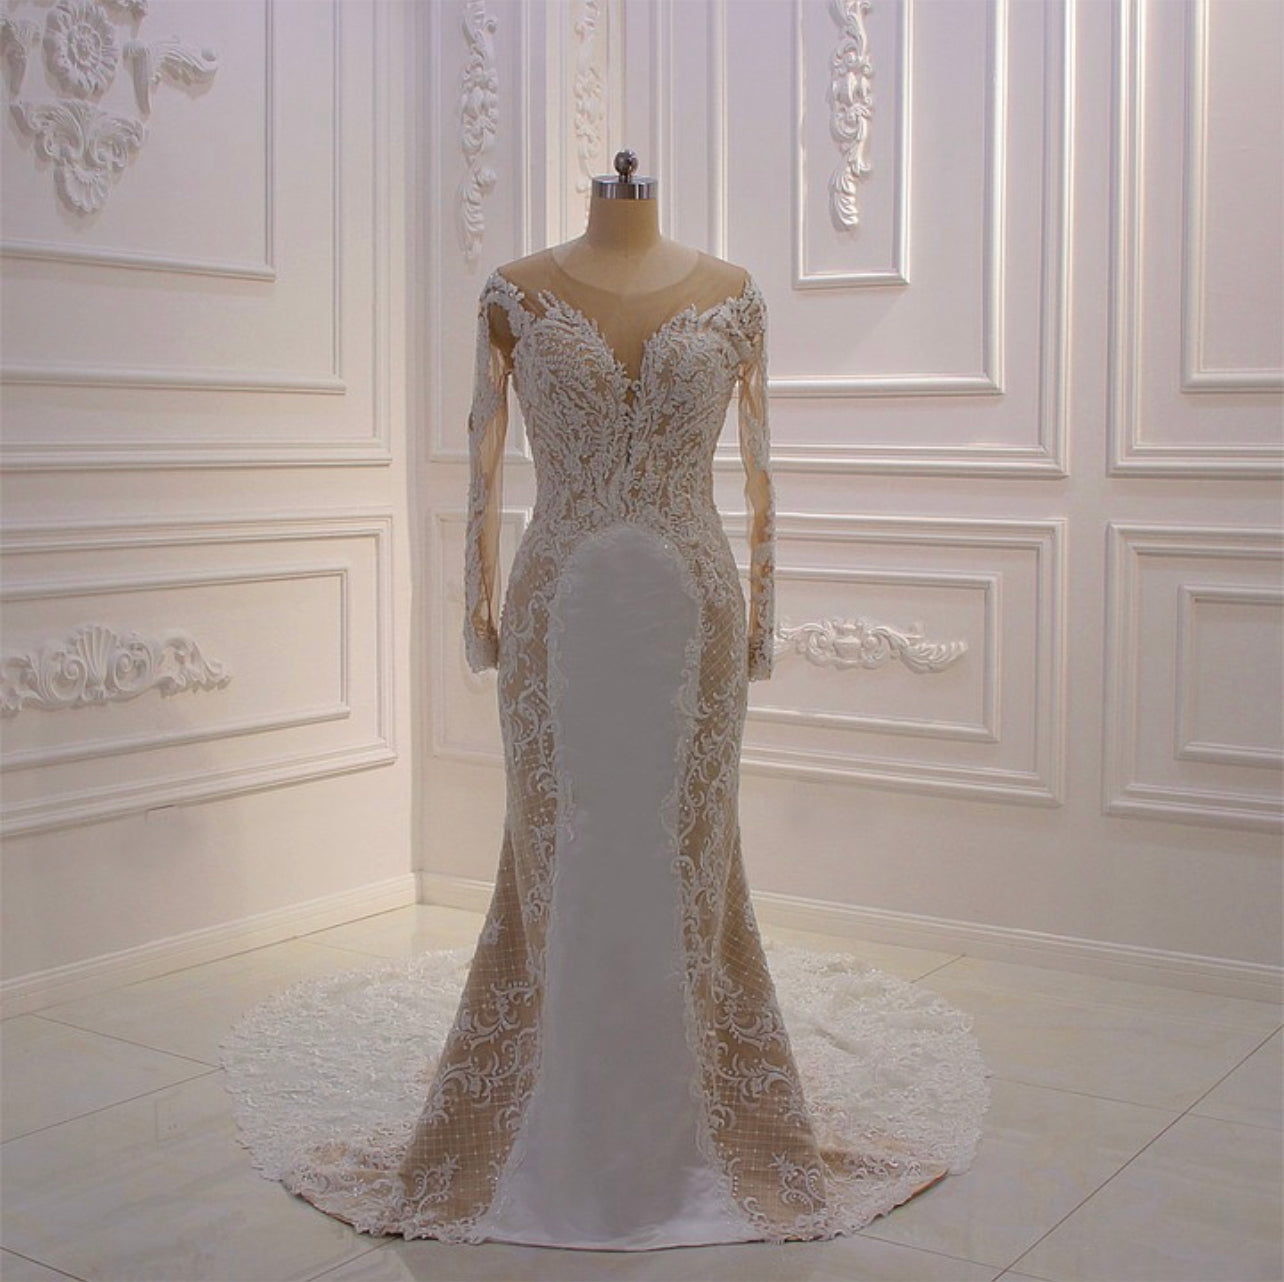 AM449 Long Sleeve Lace Appliqued See Through Back Wedding Dress